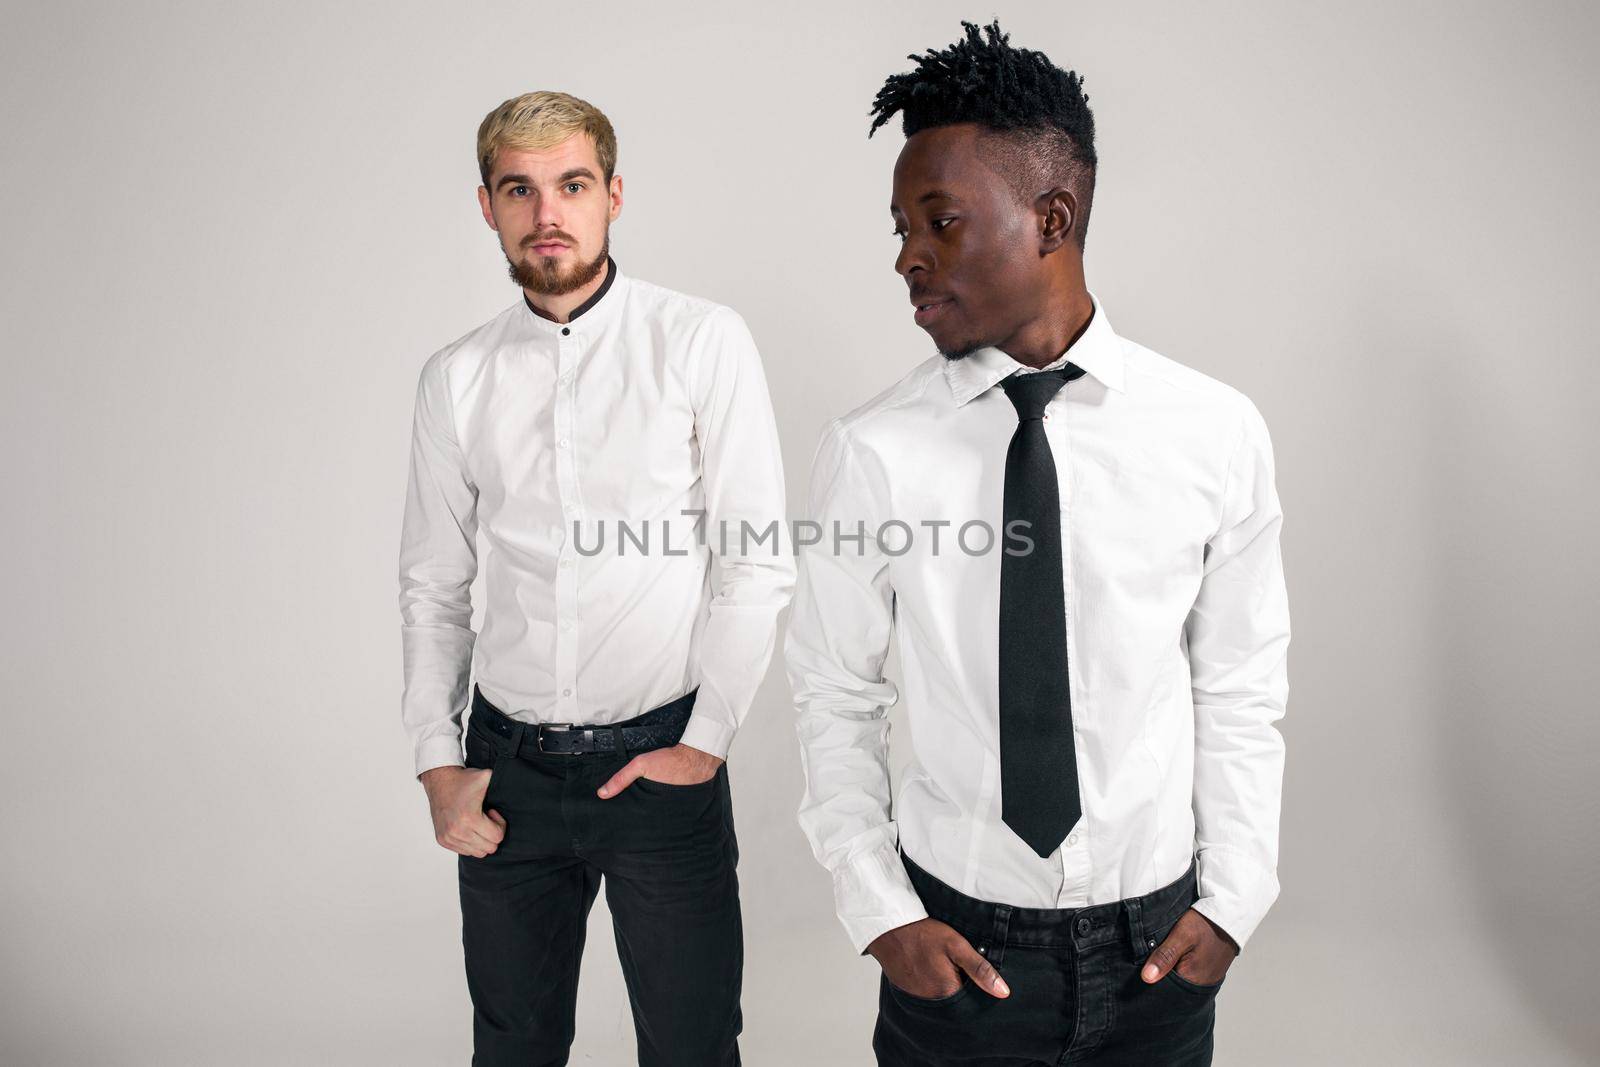 International friendship concept. Studio shot of two stylish young men: handsome bearded young man in white shirt and jeans standing next to his African-American friend on white background